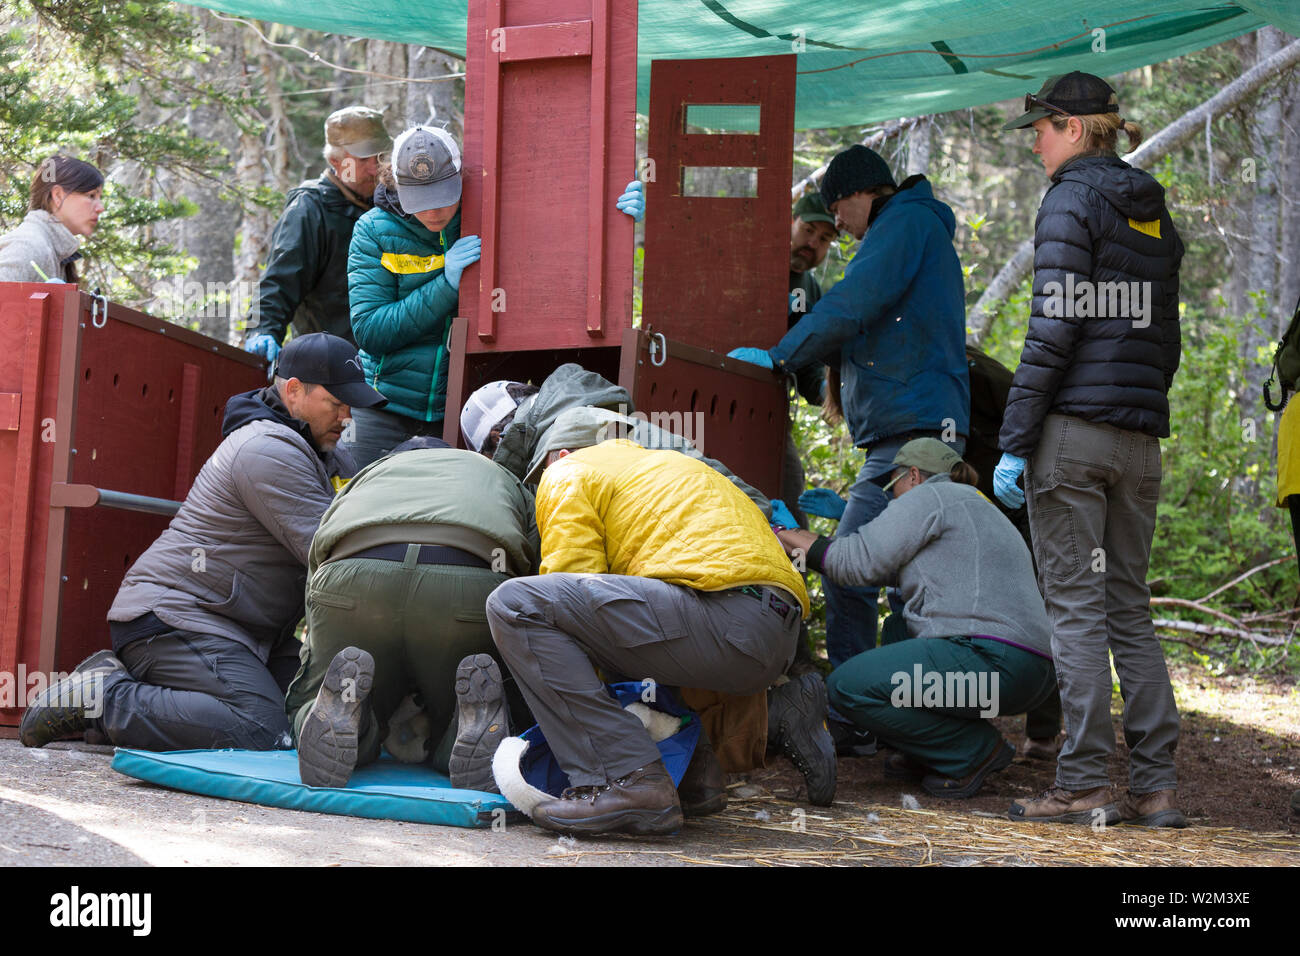 A team of rangers, employees and volunteers crate a tranquilized mountain goat at Hurricane Ridge in Olympic National Park, Washington on July 9, 2019. Today is the second day of a two-week long capture and translocation process moving mountain goats from Olympic National Park to the northern Cascade Mountains. The effort is a collaboration between the National Park Service, the Washington Department of Fish & Wildlife and the USDA Forest Service to re-establish depleted populations of mountain goats in the Northern Cascades while also removing non-native goats from the Olympic Mountains. The Stock Photo